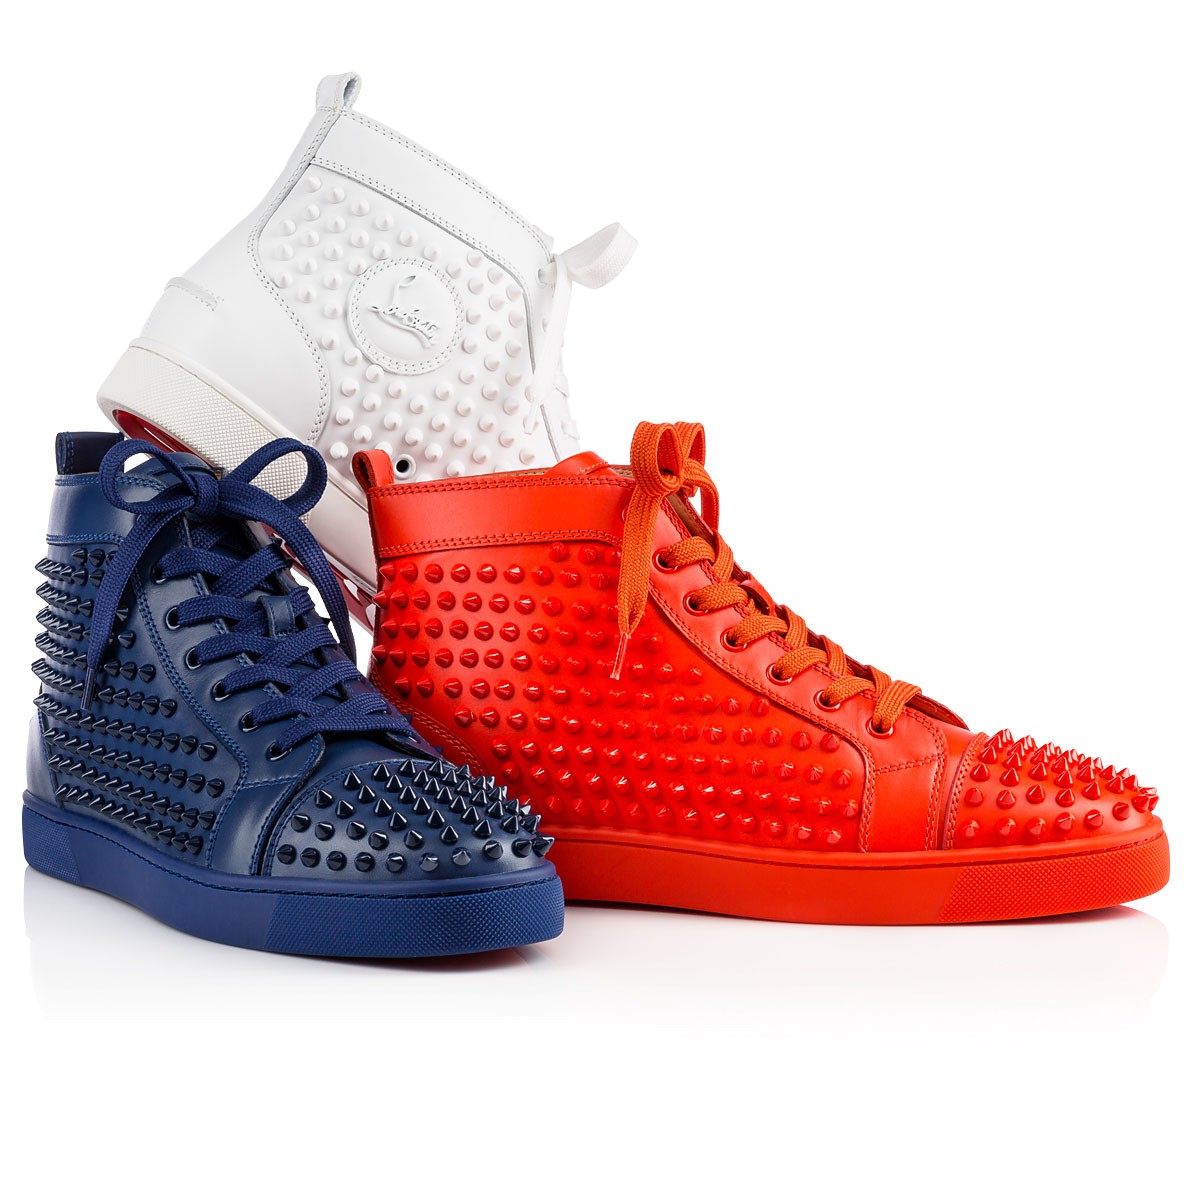 Christian Louboutin Mens Shoes Spikes  Spike Louis Vuitton Red Bottoms Mens  - Luxury - Aliexpress